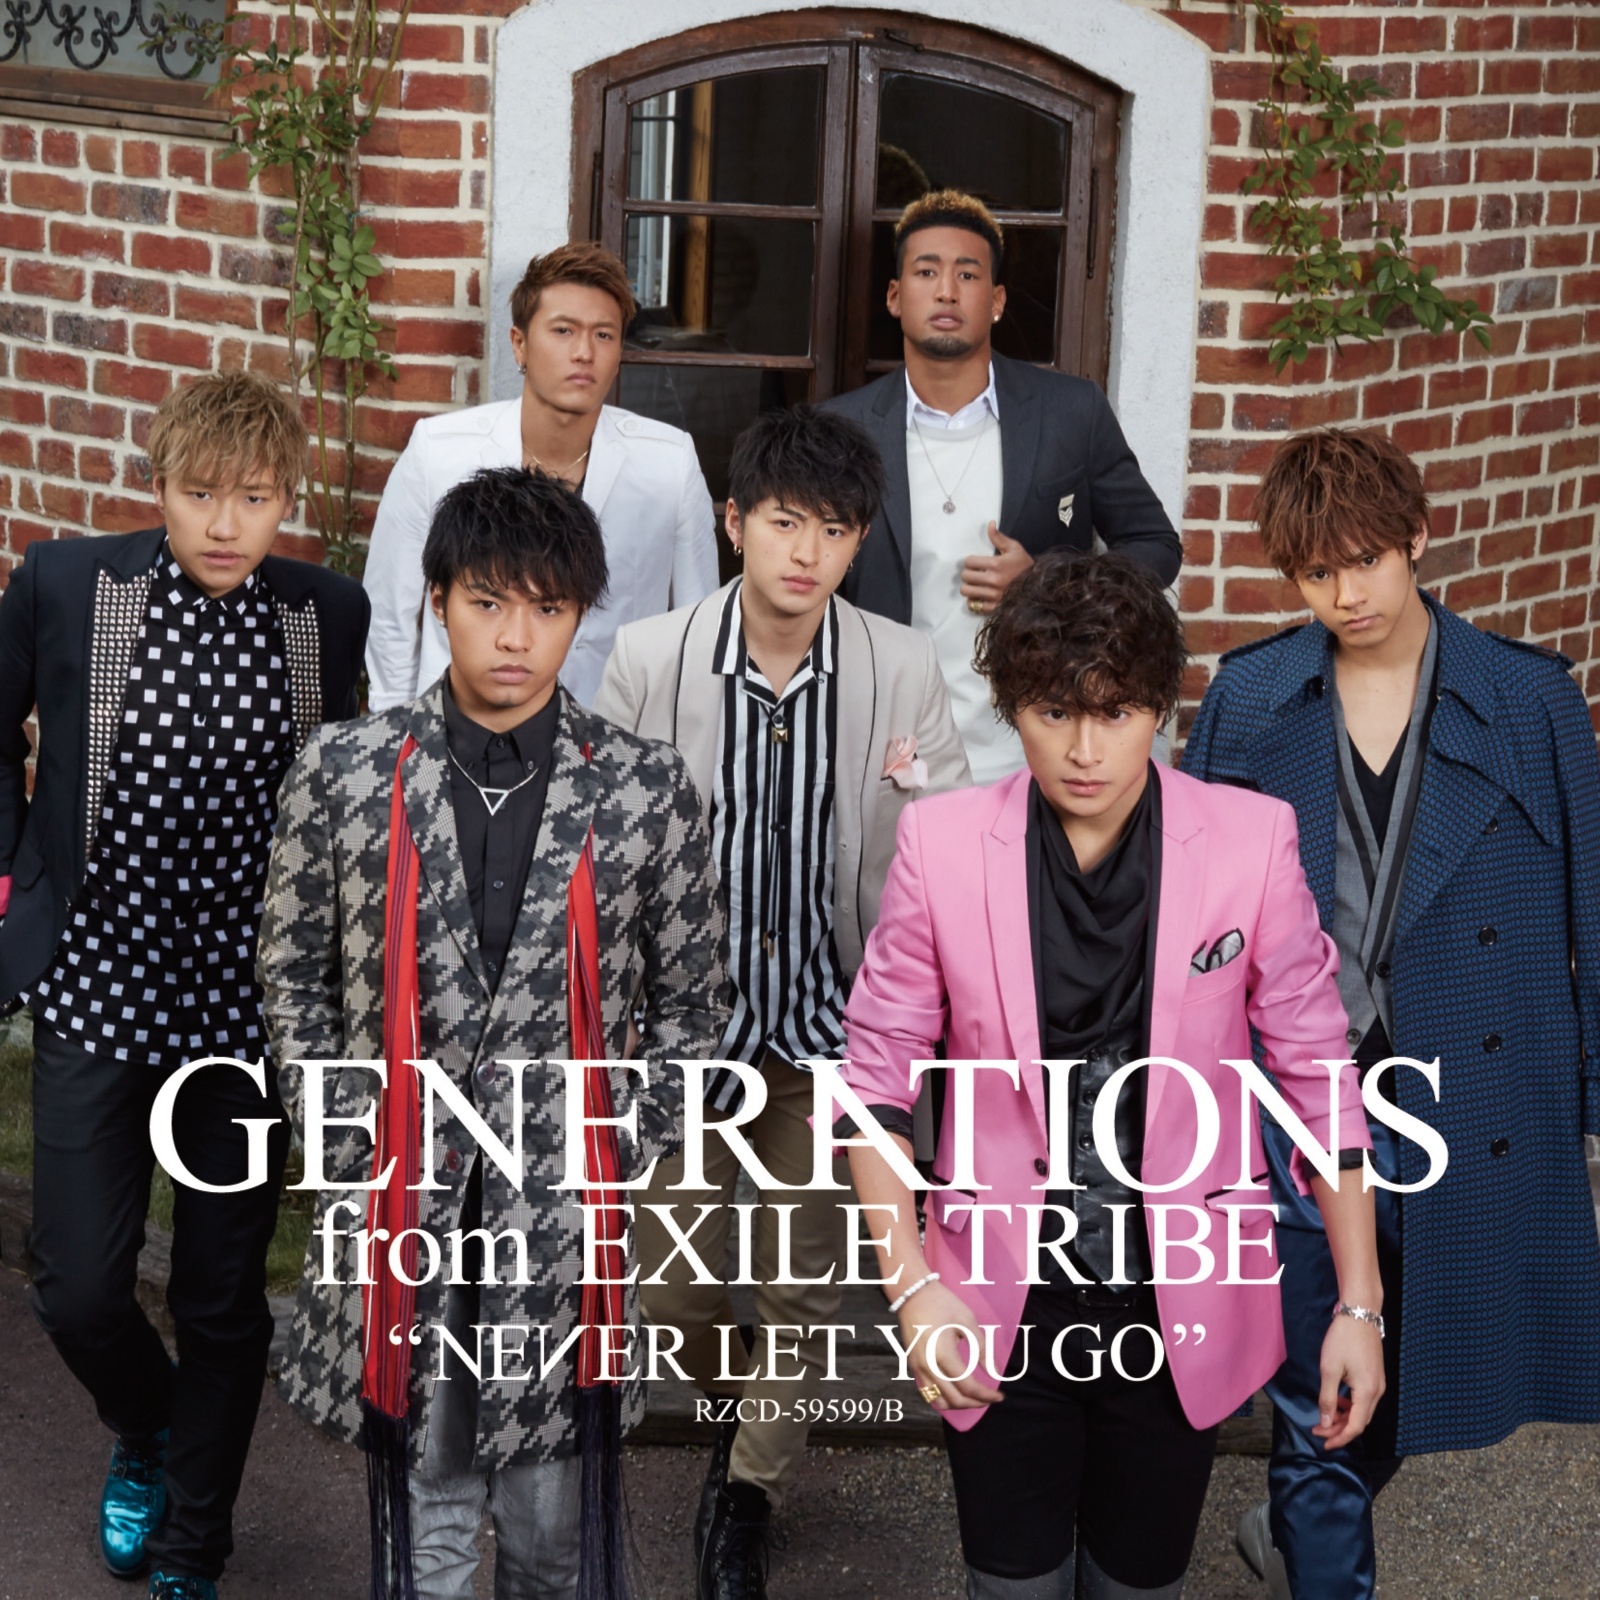 Revolver(GENERATIONS from EXILE TRIBE演唱歌曲)